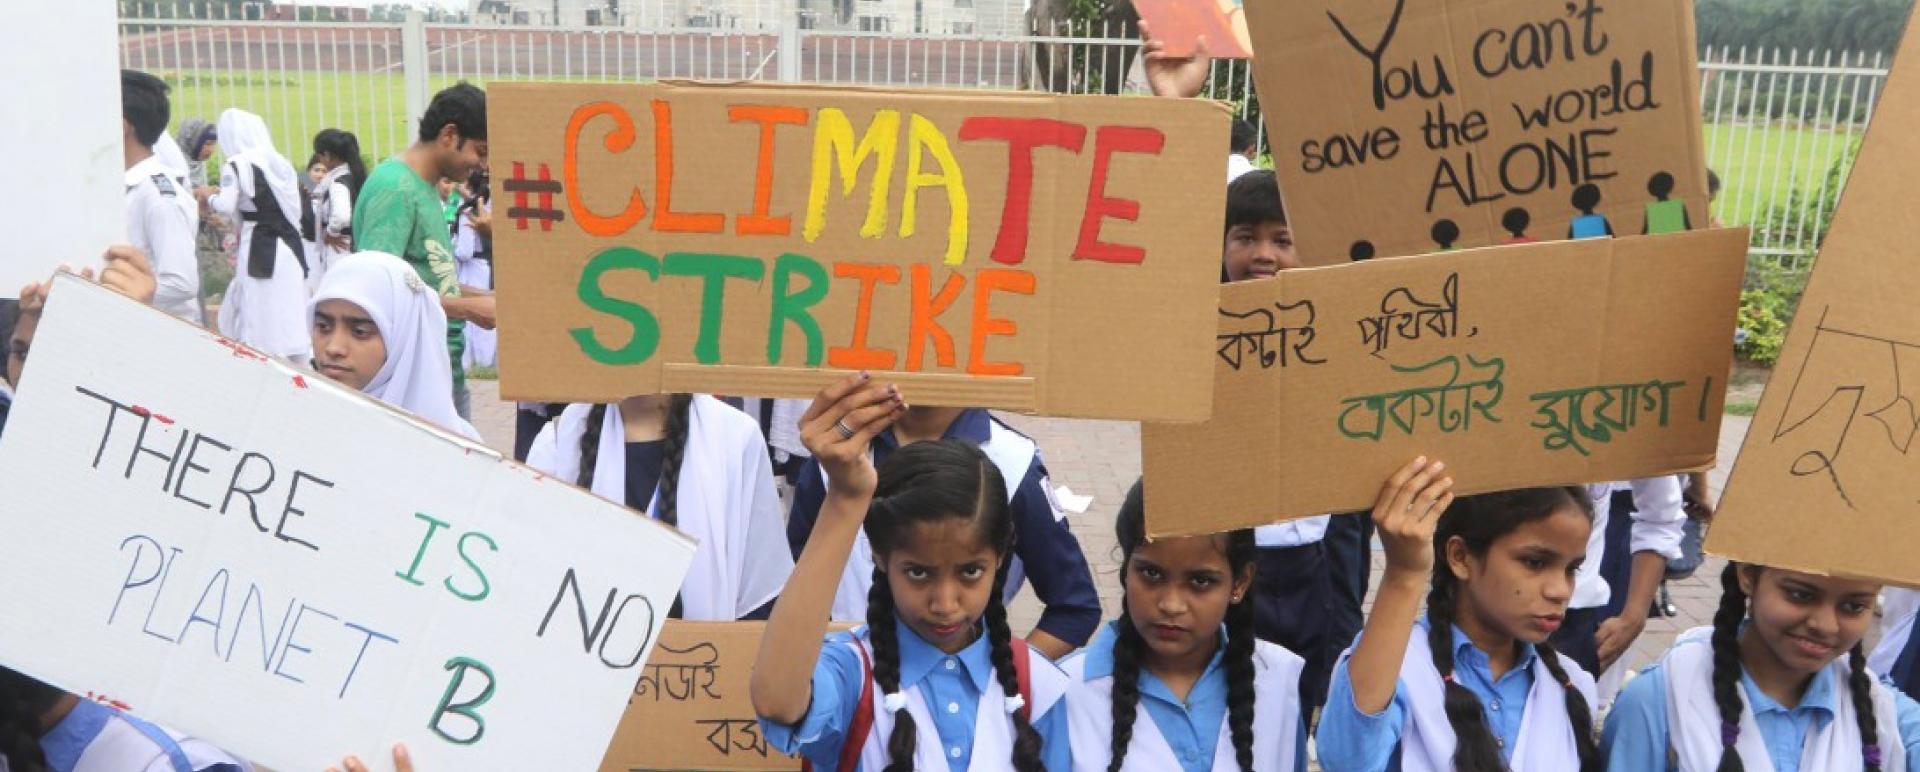 Thousands of children from different schools and colleges on September 20, 2019 stage a demonstration at Manik Mia Avenue in Dhaka urging the world leaders to act against climate change. Photo: Star/ Prabir Das